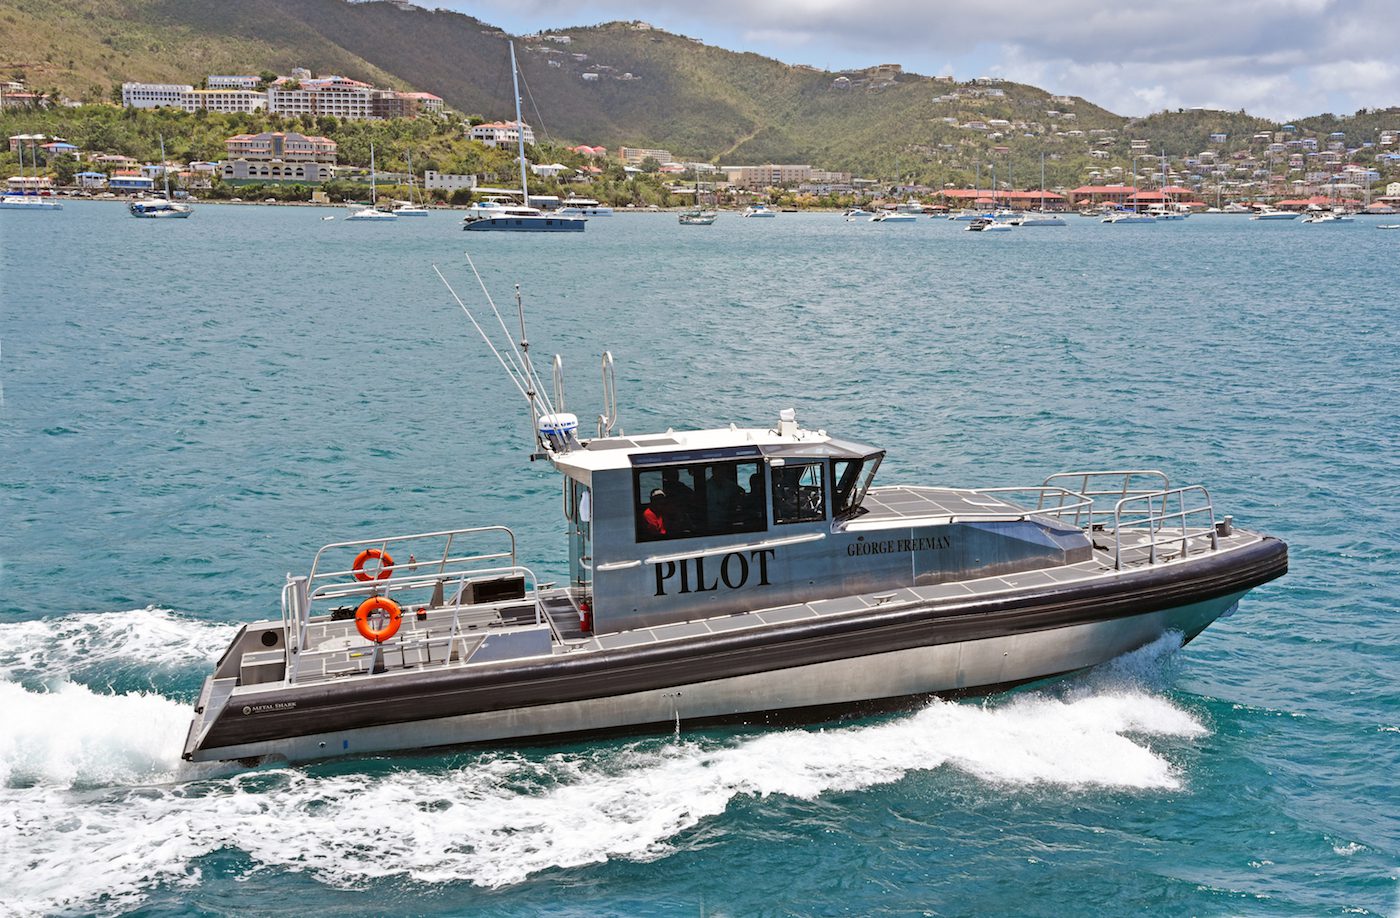 Metal Shark Delivers New 45’ Pilot Boat and 32’ Port Security Boat to the Virgin Islands Port Authority